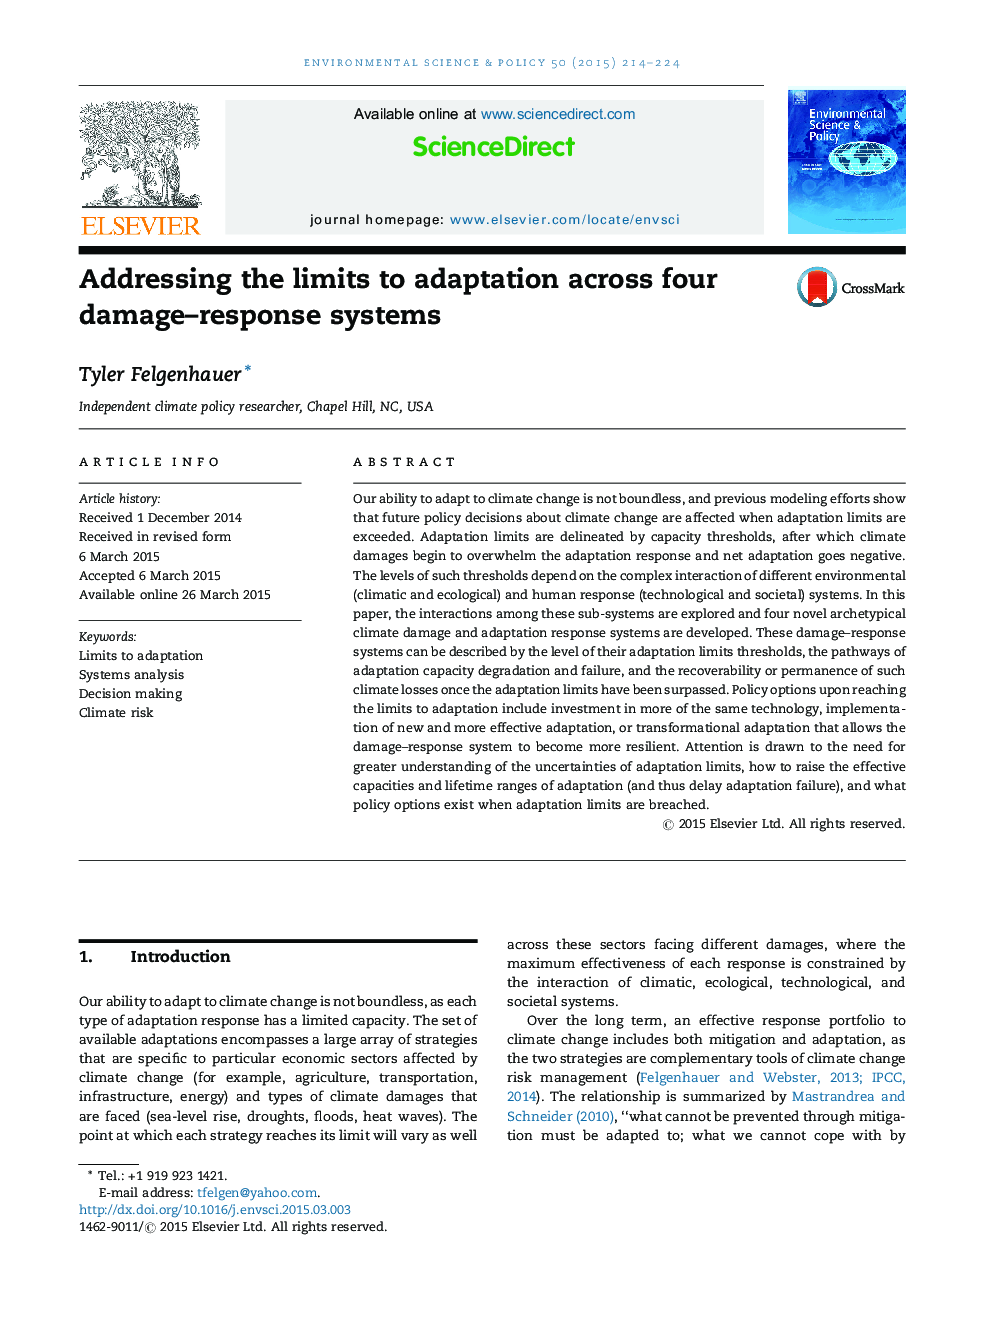 Addressing the limits to adaptation across four damage–response systems